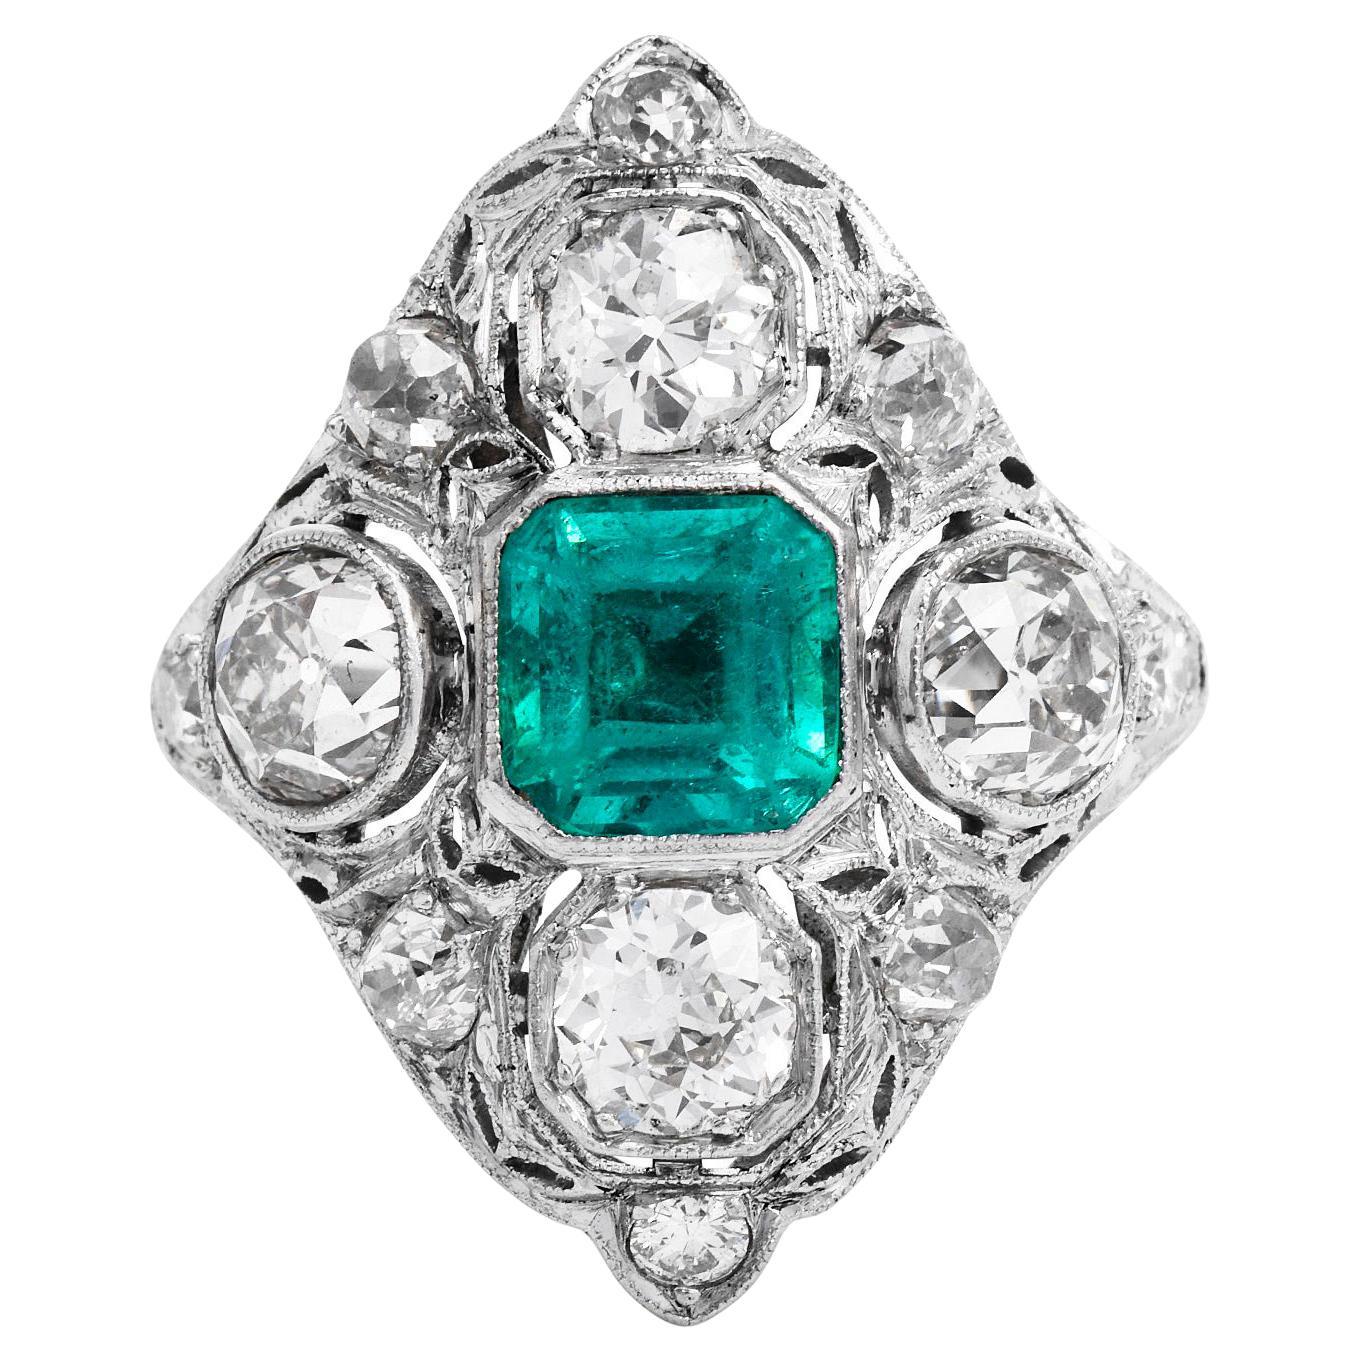 Collectable Antique Emerald Cocktail Ring!

Centered with a Colombian genuine Emerald, with a Traditional Octagonal cut & bezel Set, weighing approximately 1.30 carats, it is the perfect center for a striking Cocktail Ring!

It is crafted in solid